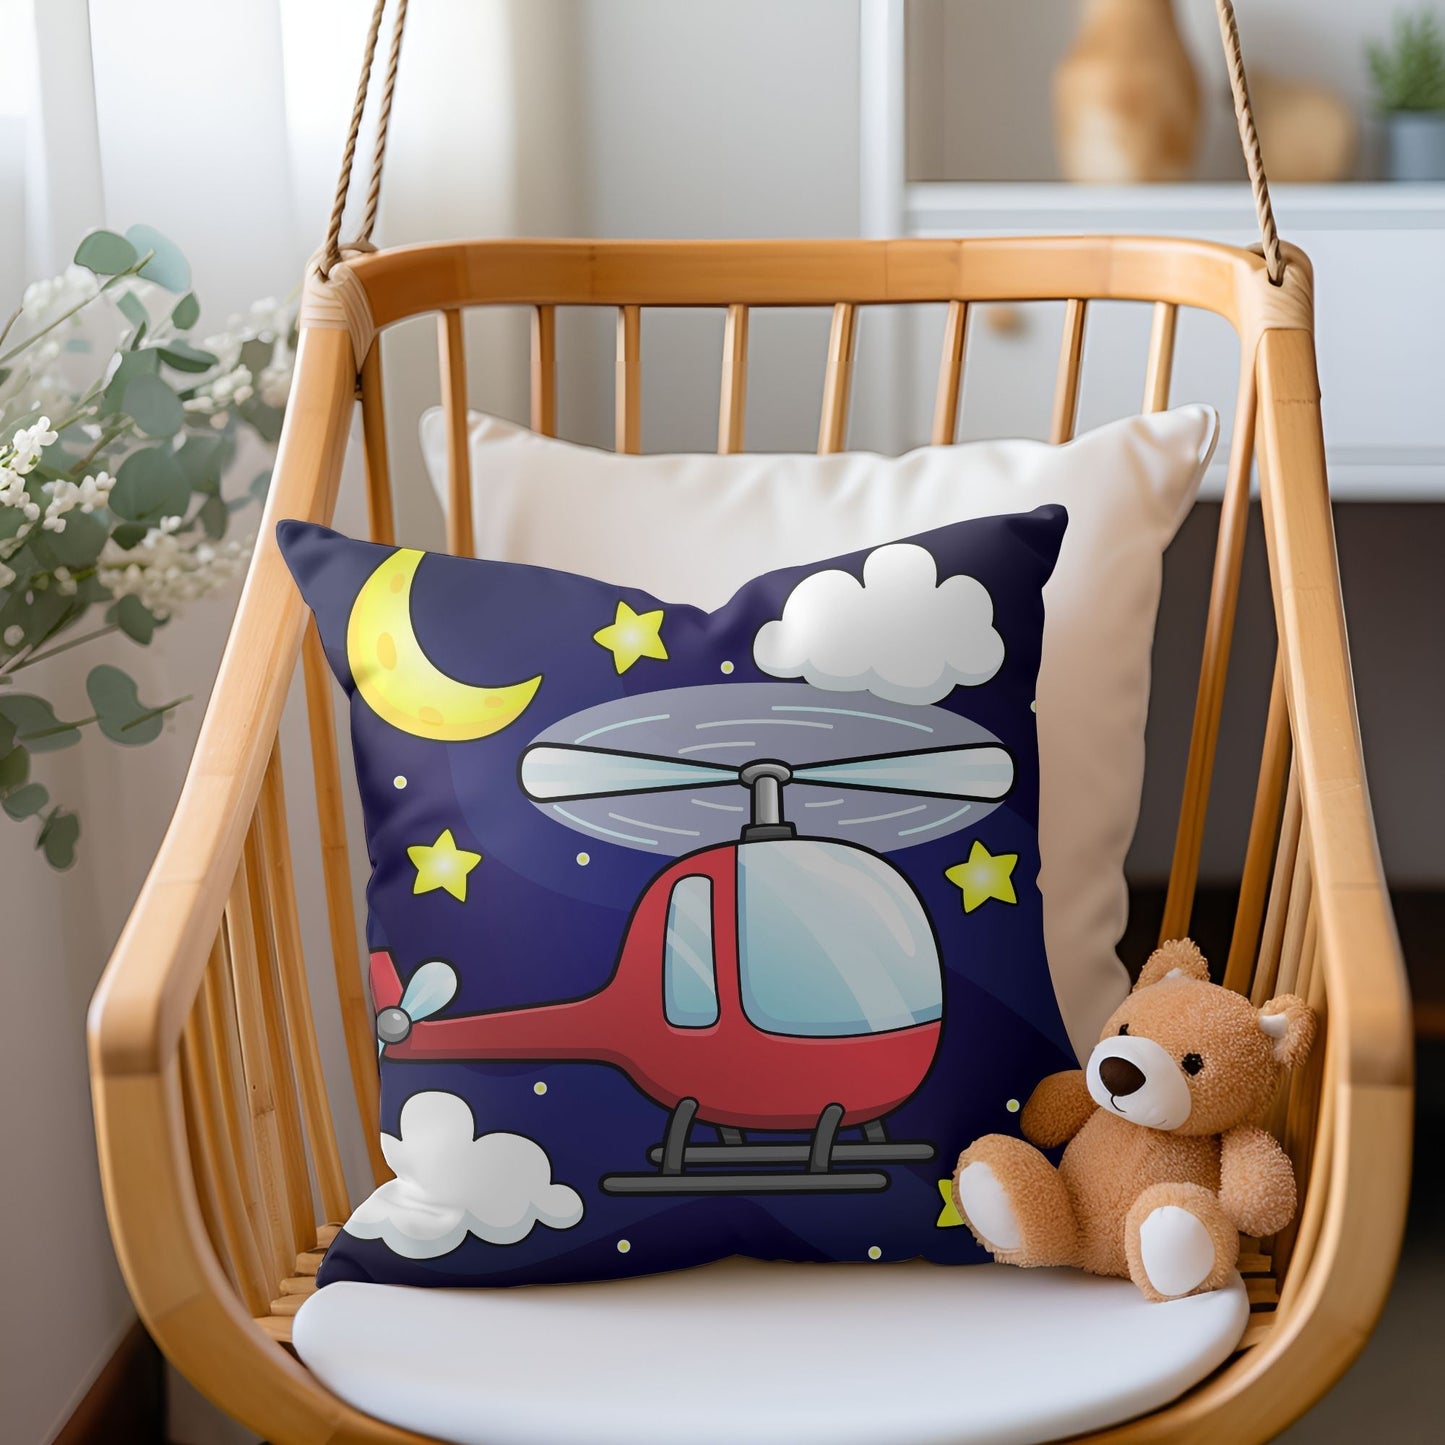 Vibrant kids pillow with a red helicopter design for a dynamic atmosphere.